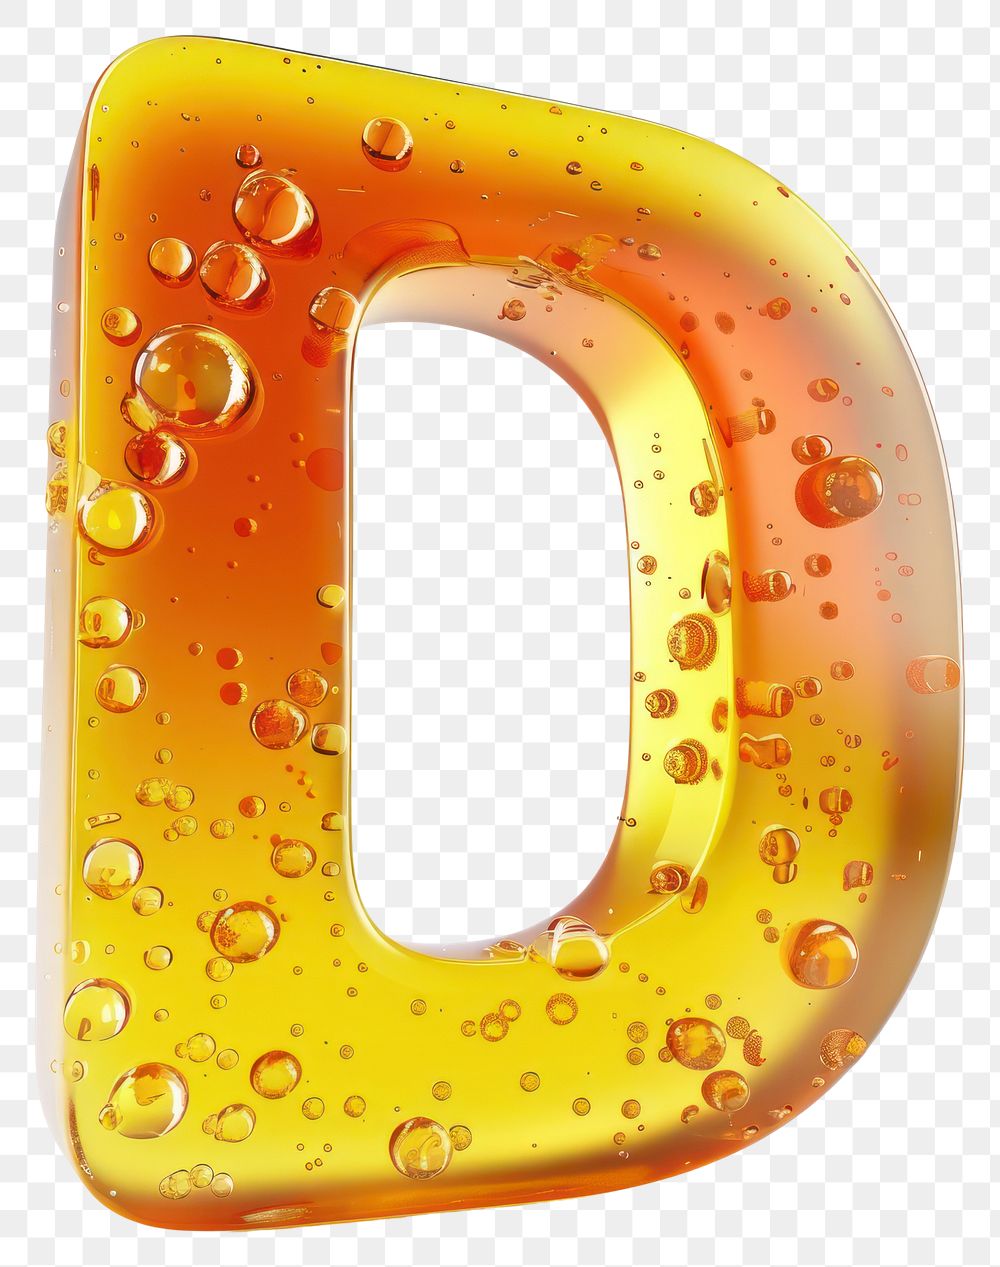 Letter D yellow bubble number.